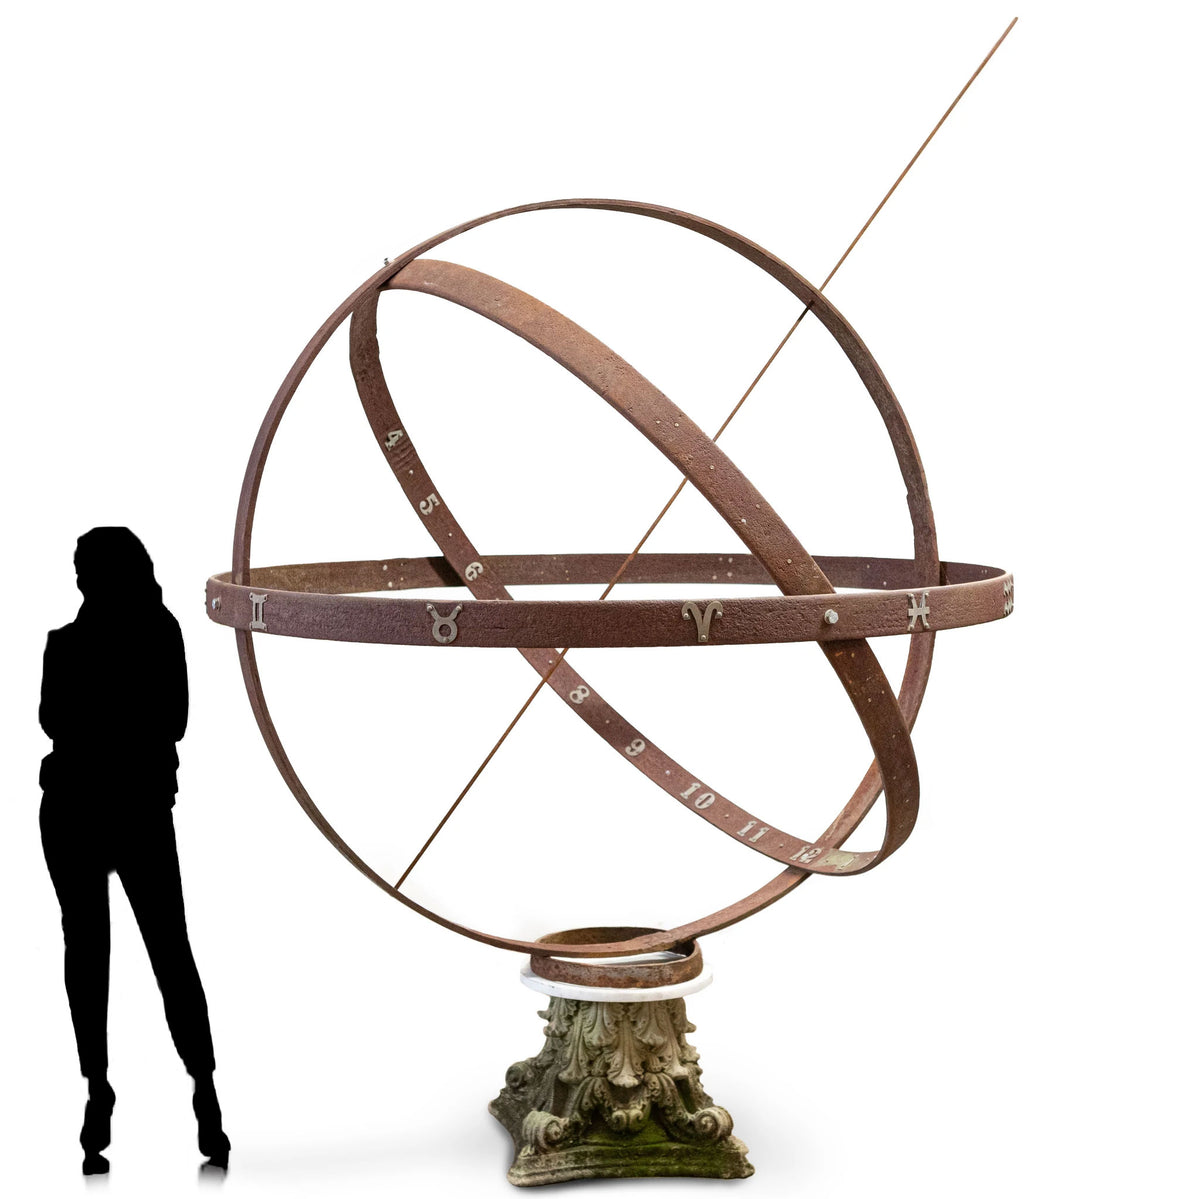 Reclaimed Large Armillary Sphere | Spherical Astrolabe | The Architectural Forum